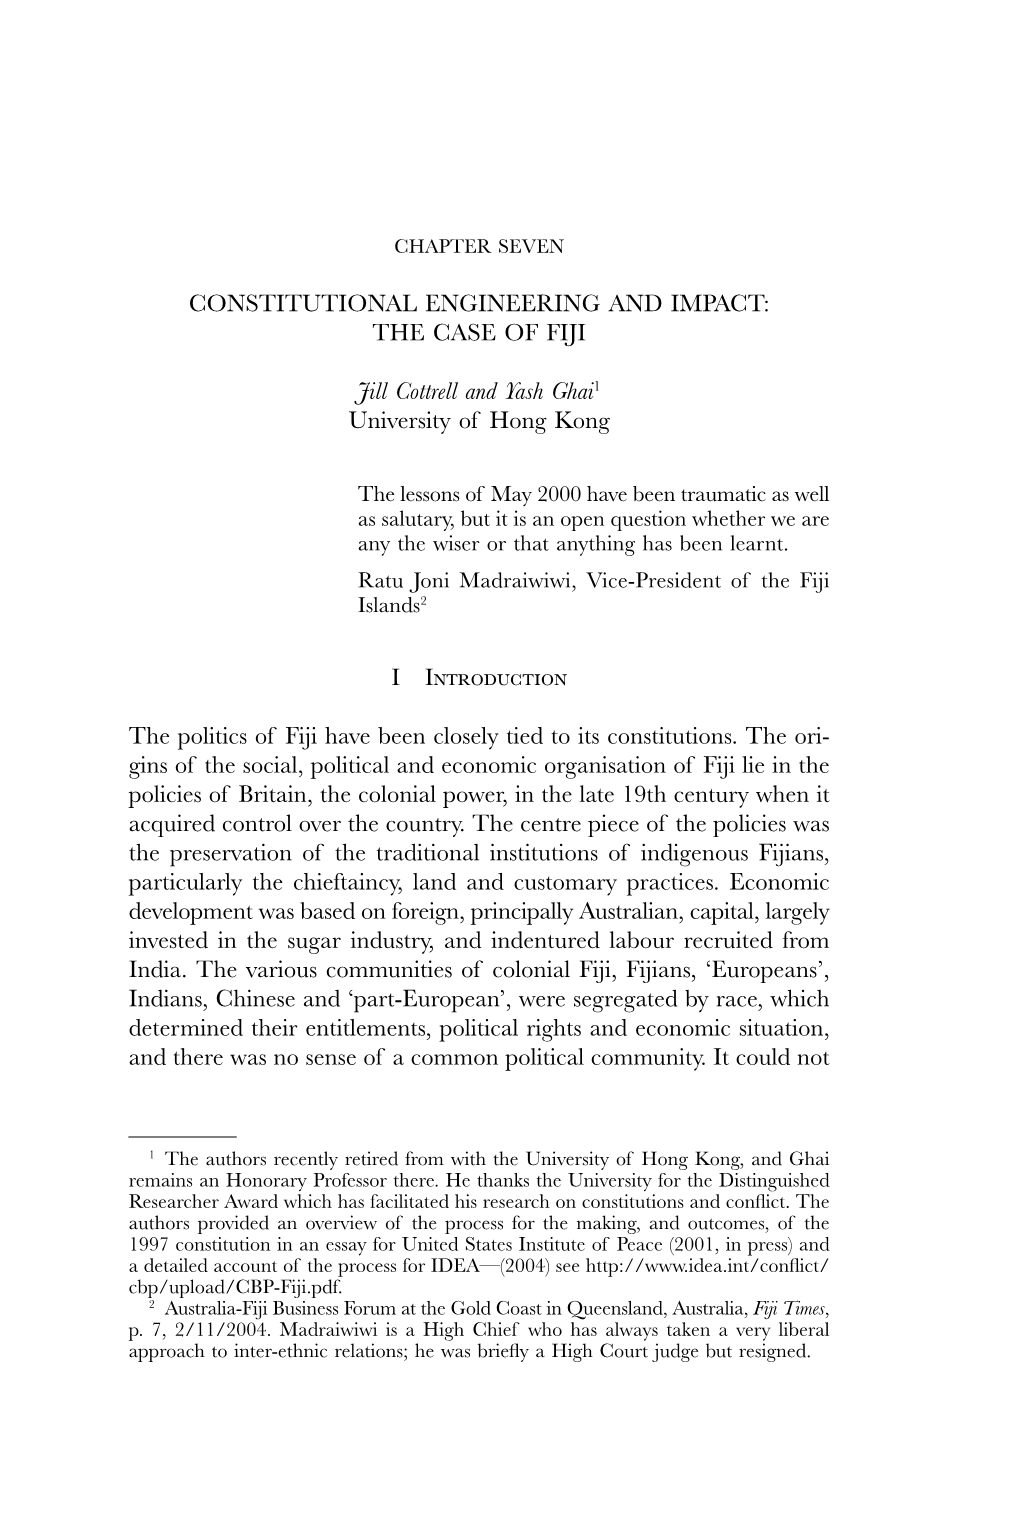 Constitutional Engineering and Impact: the Case of Fiji